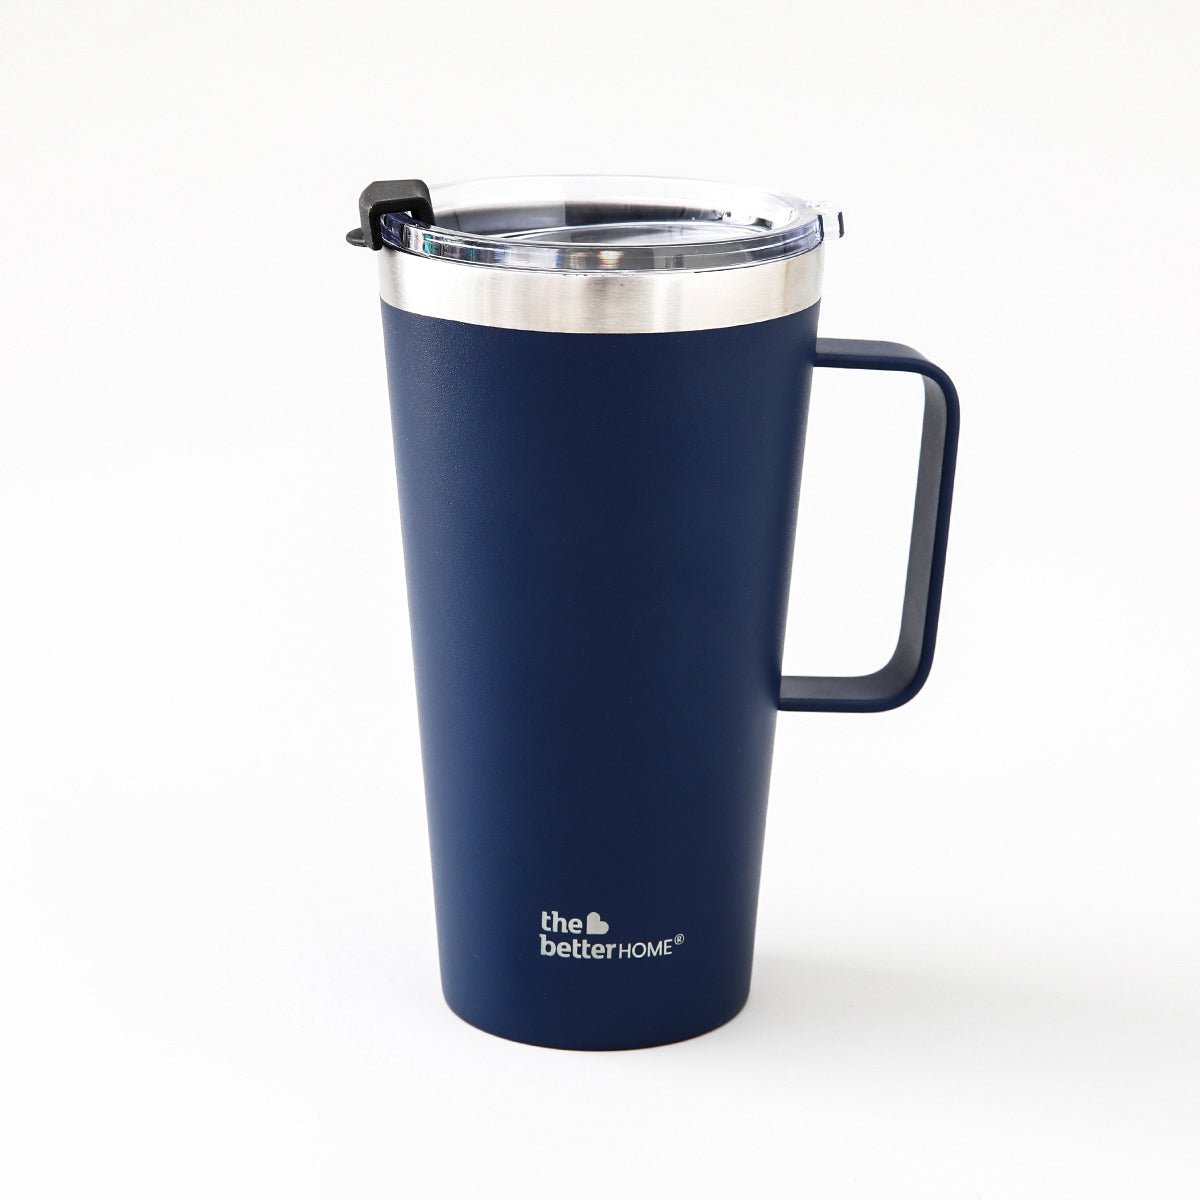 Rage Coffee - Insulated Double Wall Stainless Steel Coffee Mug - Blue 450ml product image